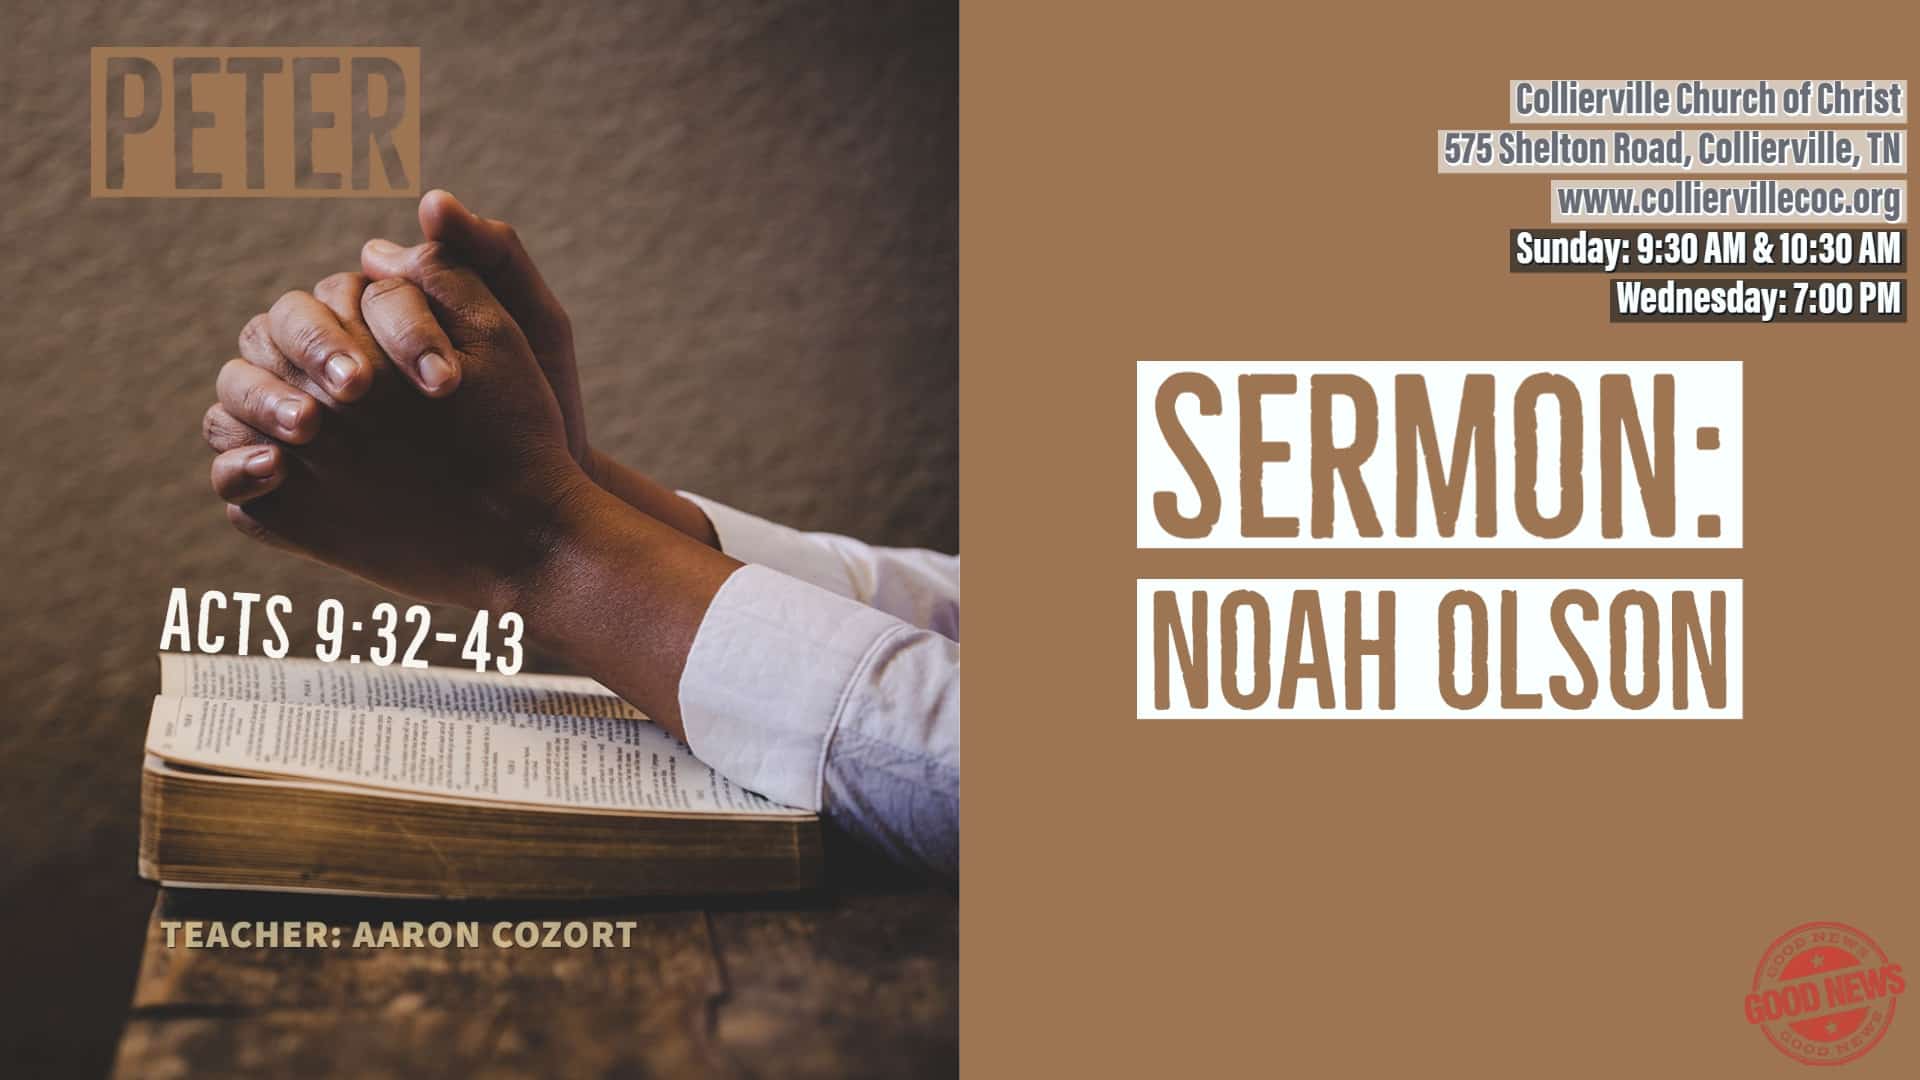 Featured image for “02-28-2021 – Live Stream – Peter Acts 9:32-43 (Class) & Noah Olson (Sermon)”